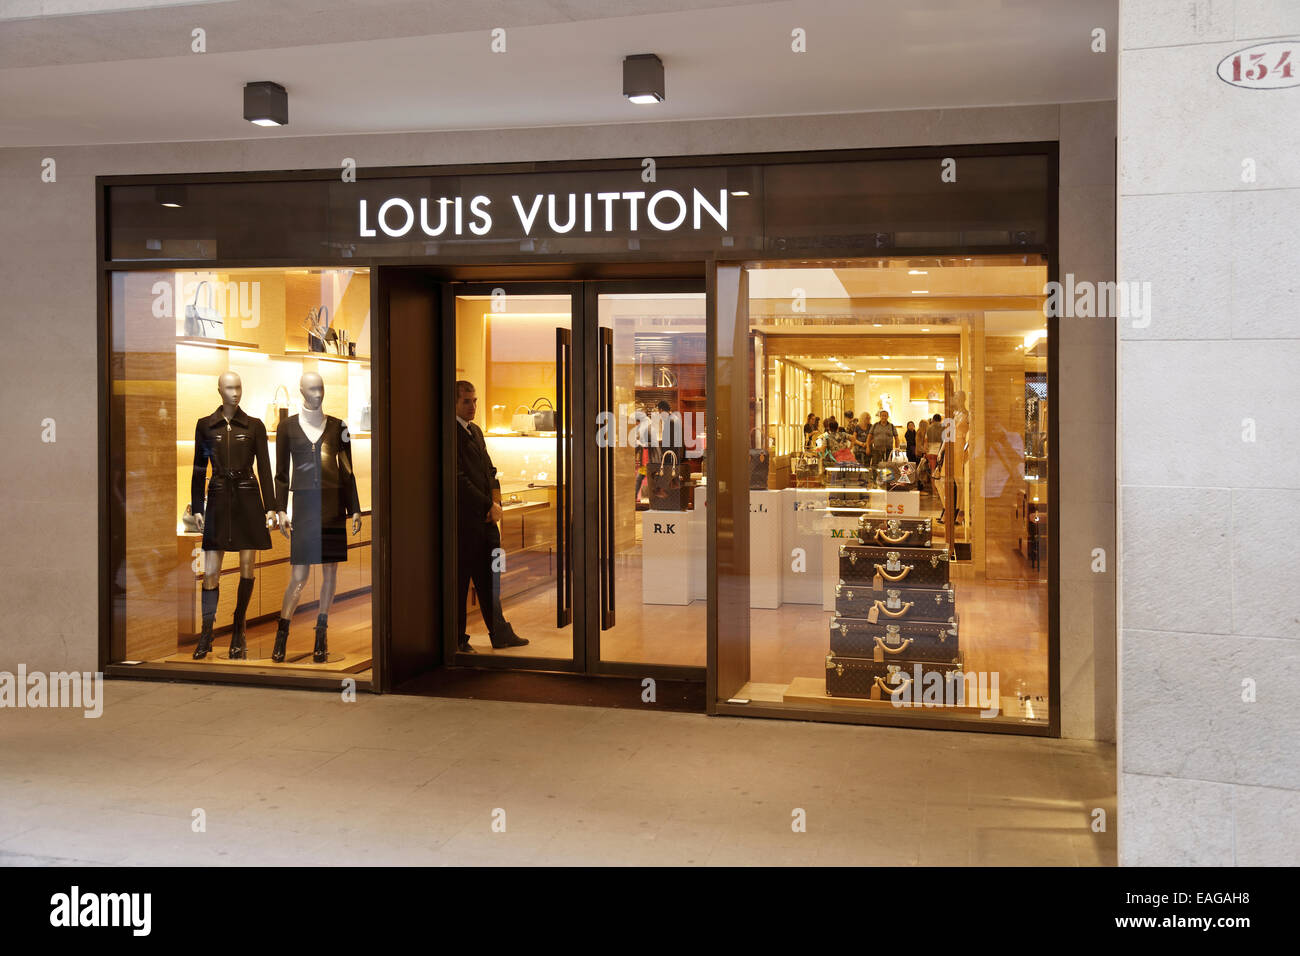 The Vuitton store in Venice, Italy Stock - Alamy